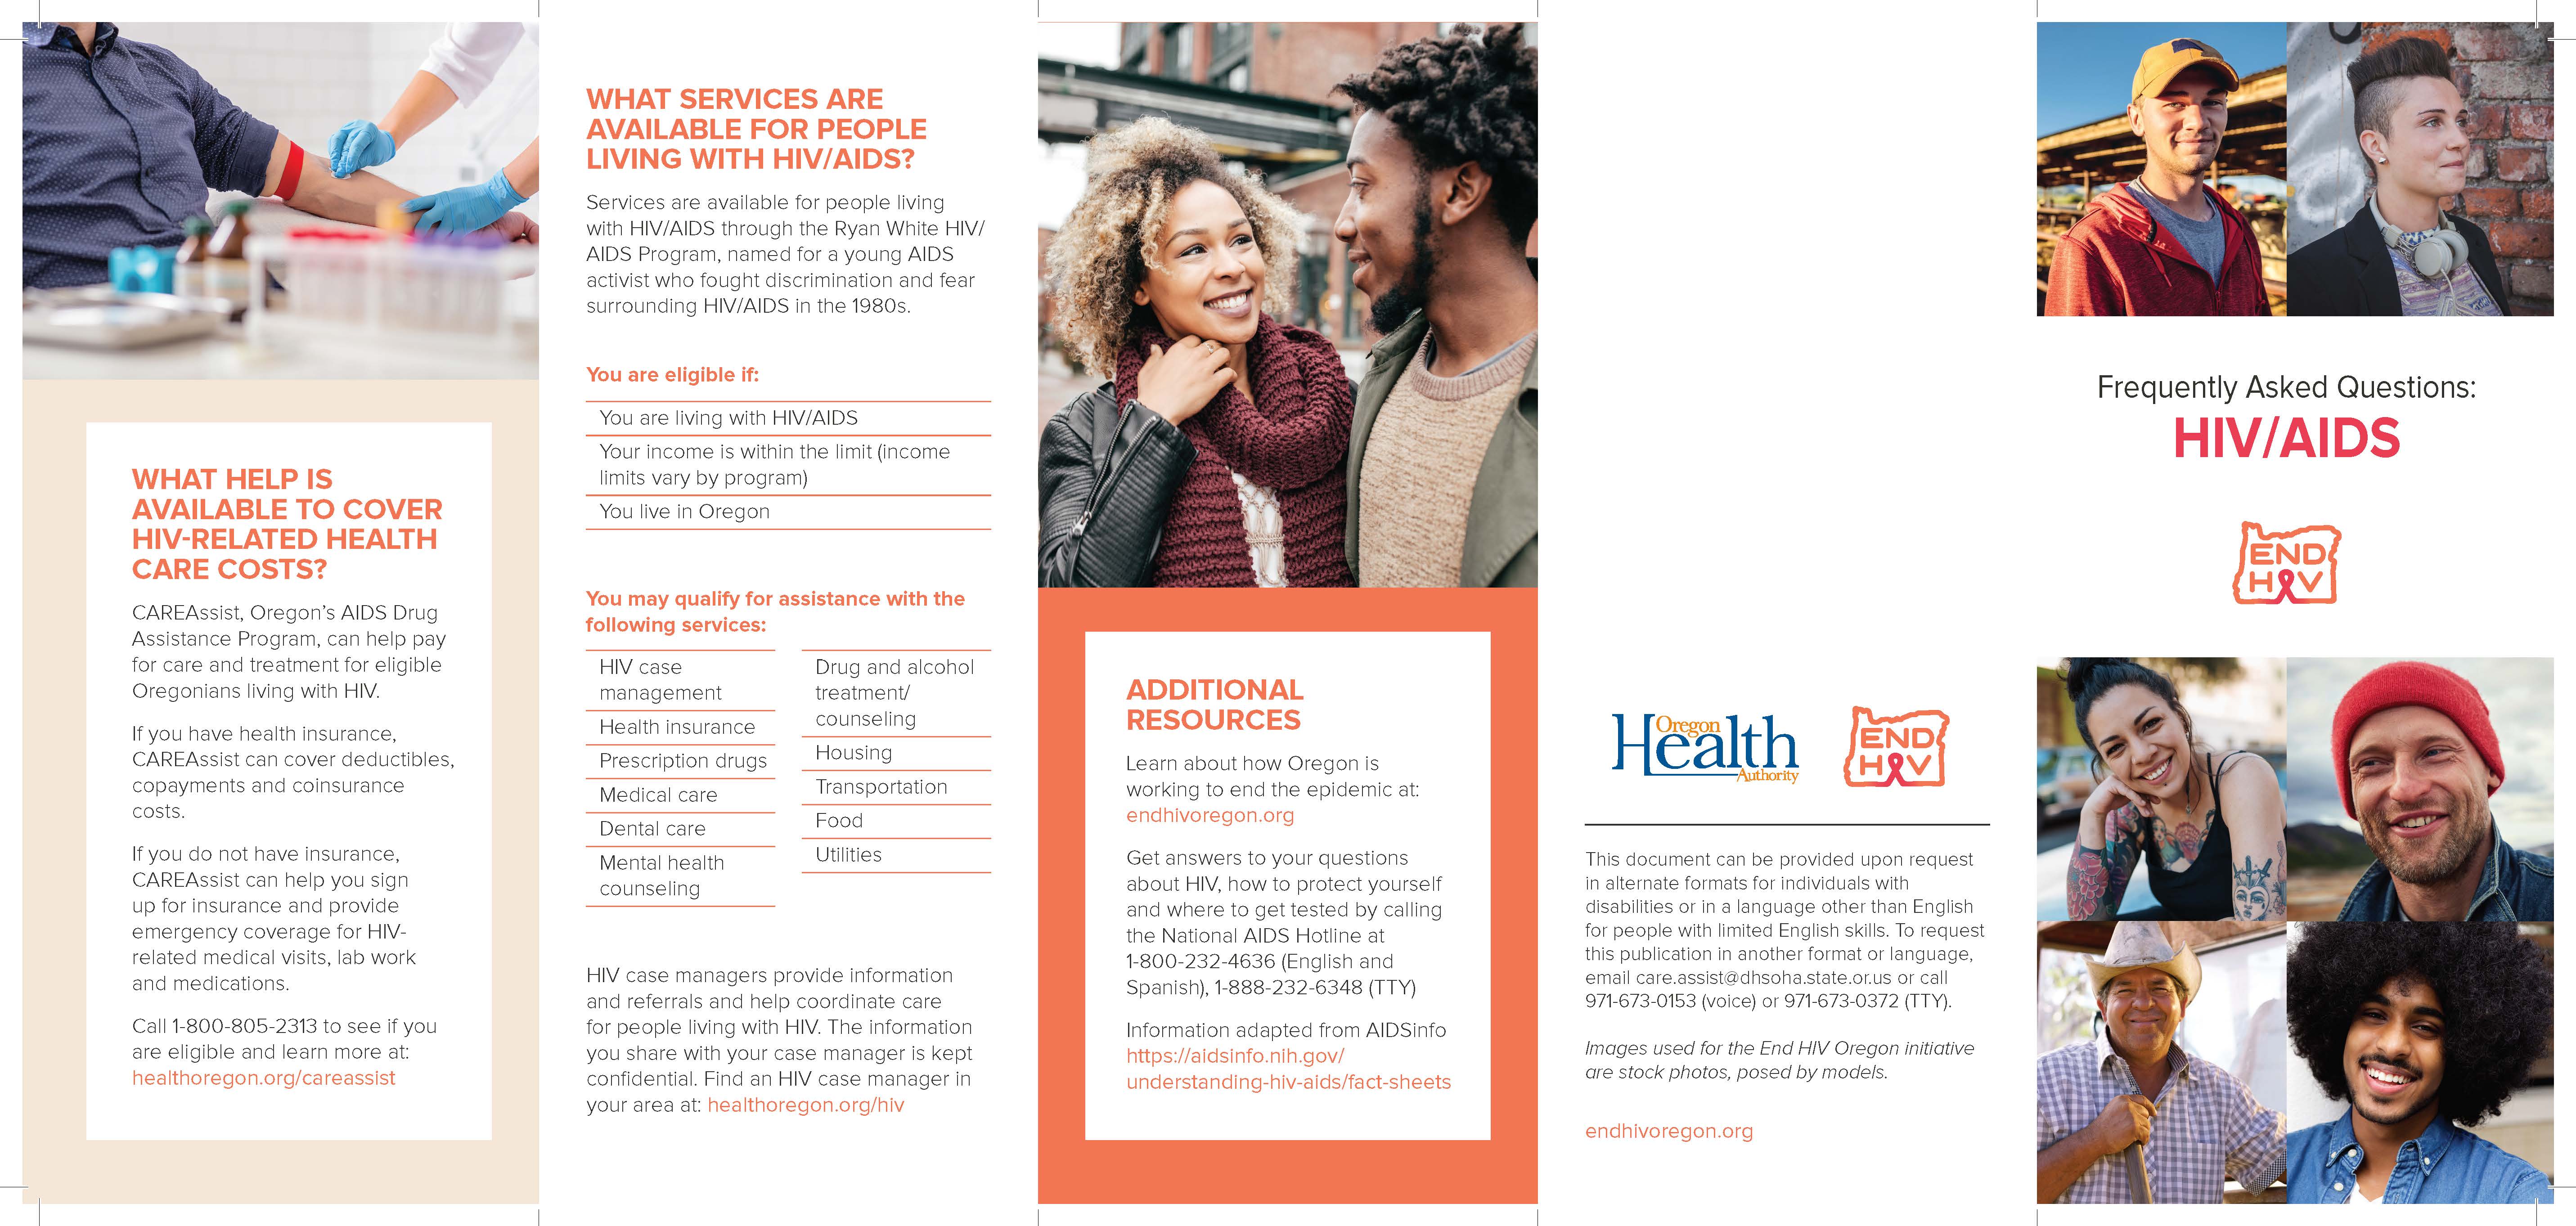 Oregon Health Authority Health Education And Campaigns Hiv